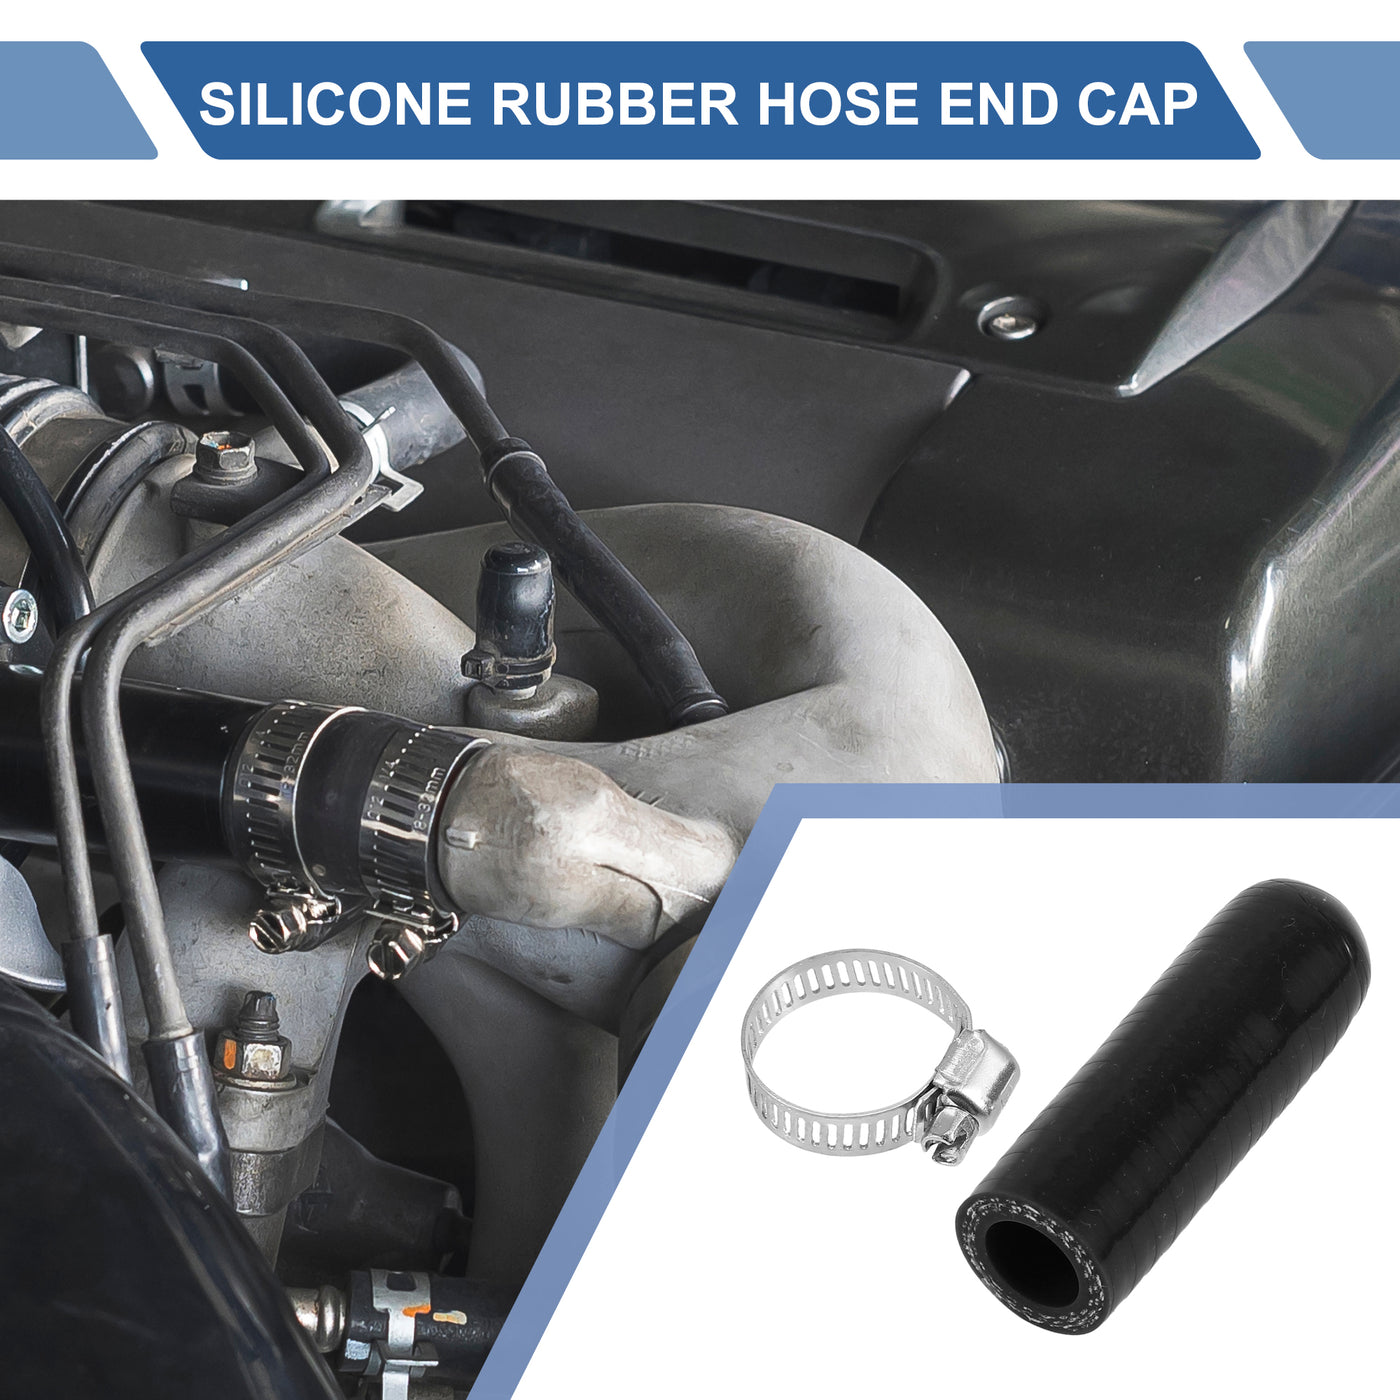 X AUTOHAUX 1 Pcs 60mm Length 14mm/0.55" ID Black Car Silicone Rubber Hose End Cap with Clamp Silicone Reinforced Blanking Cap for Bypass Tube Universal